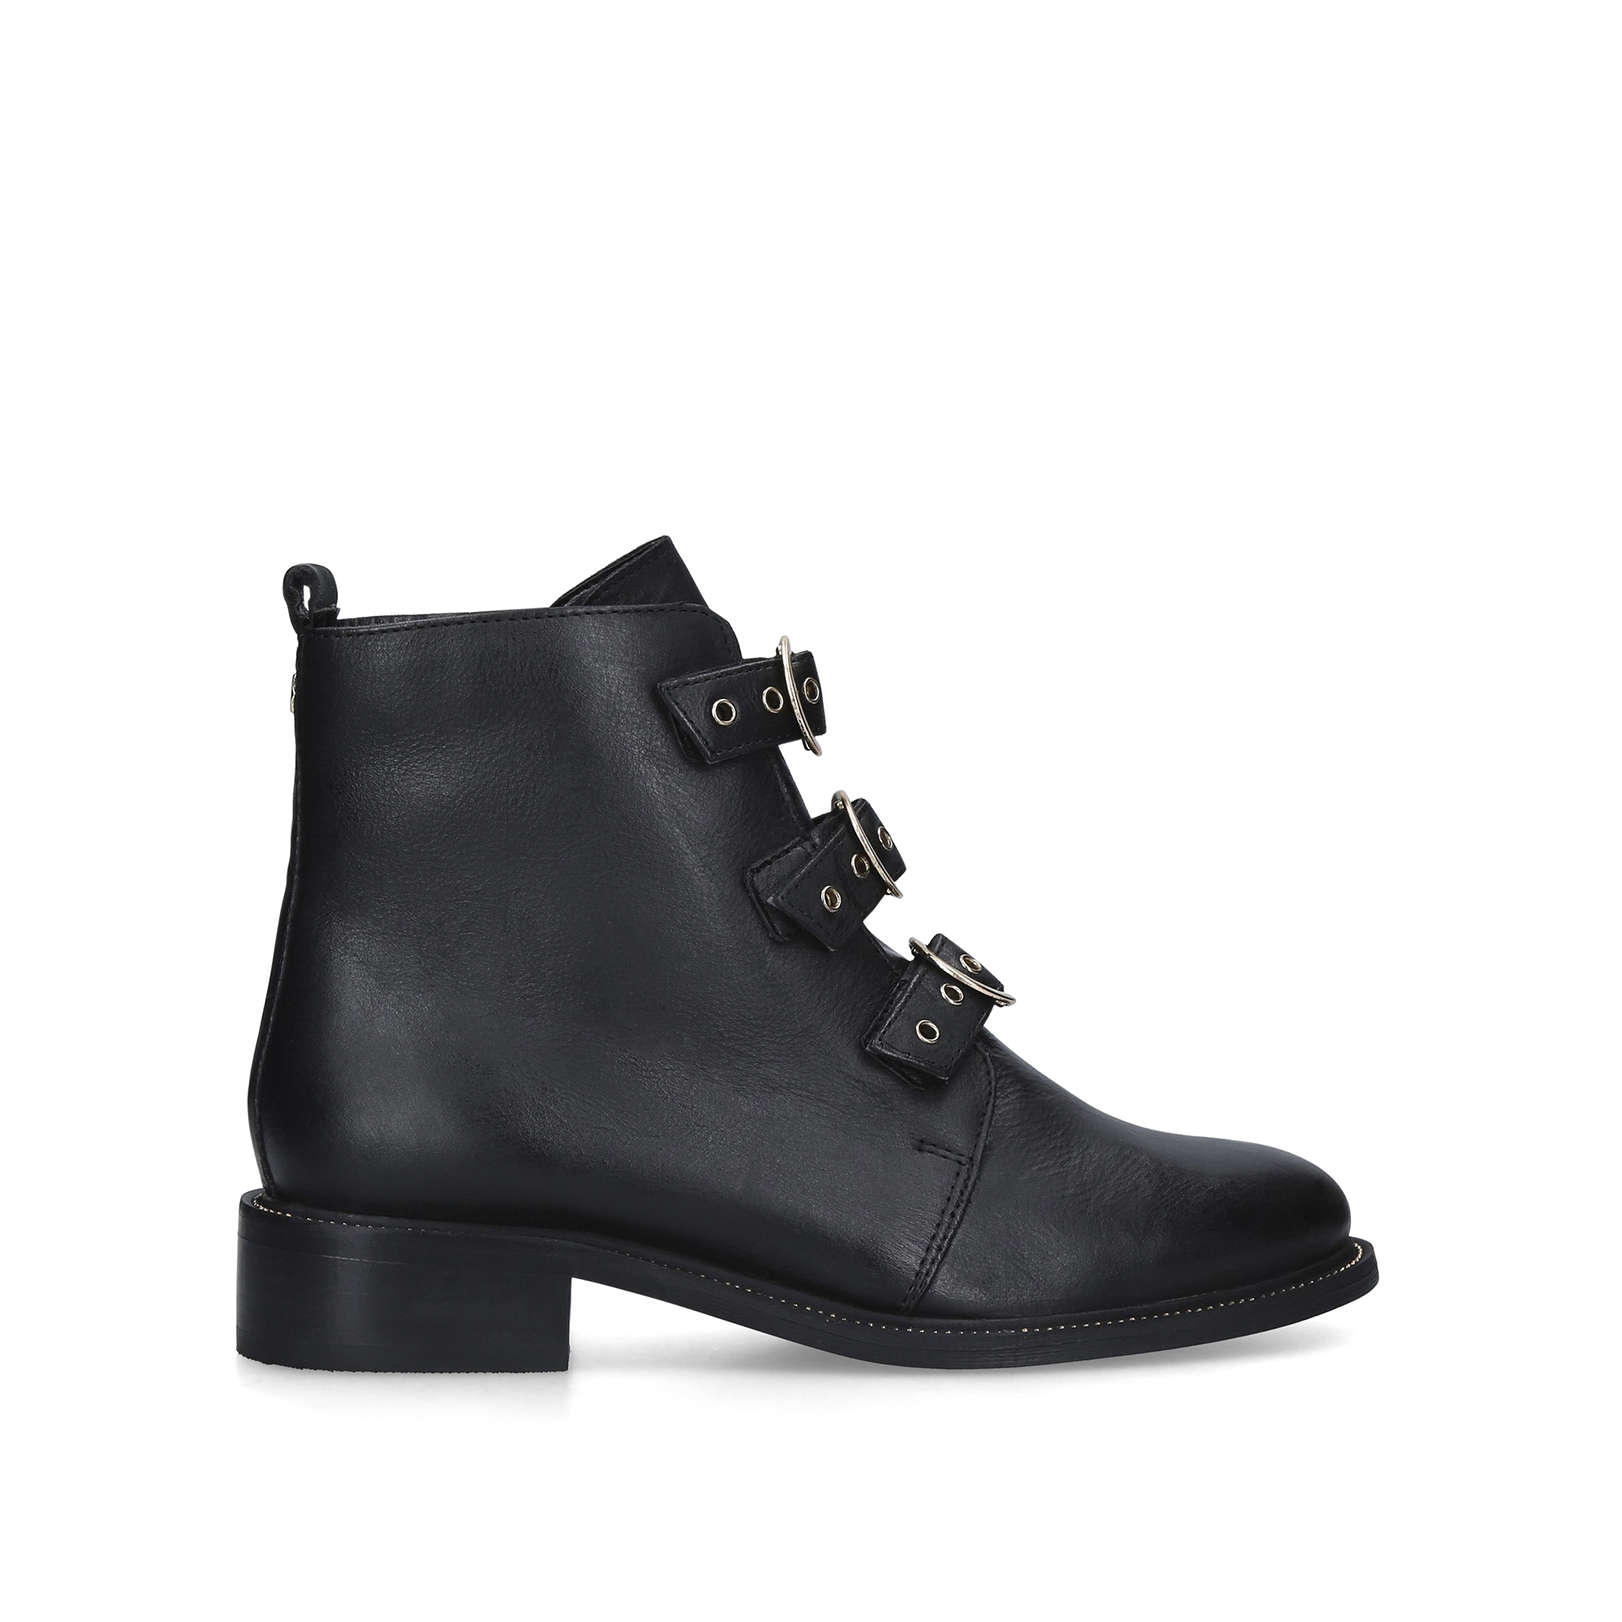 THOUGHT - CARVELA Ankle Boots